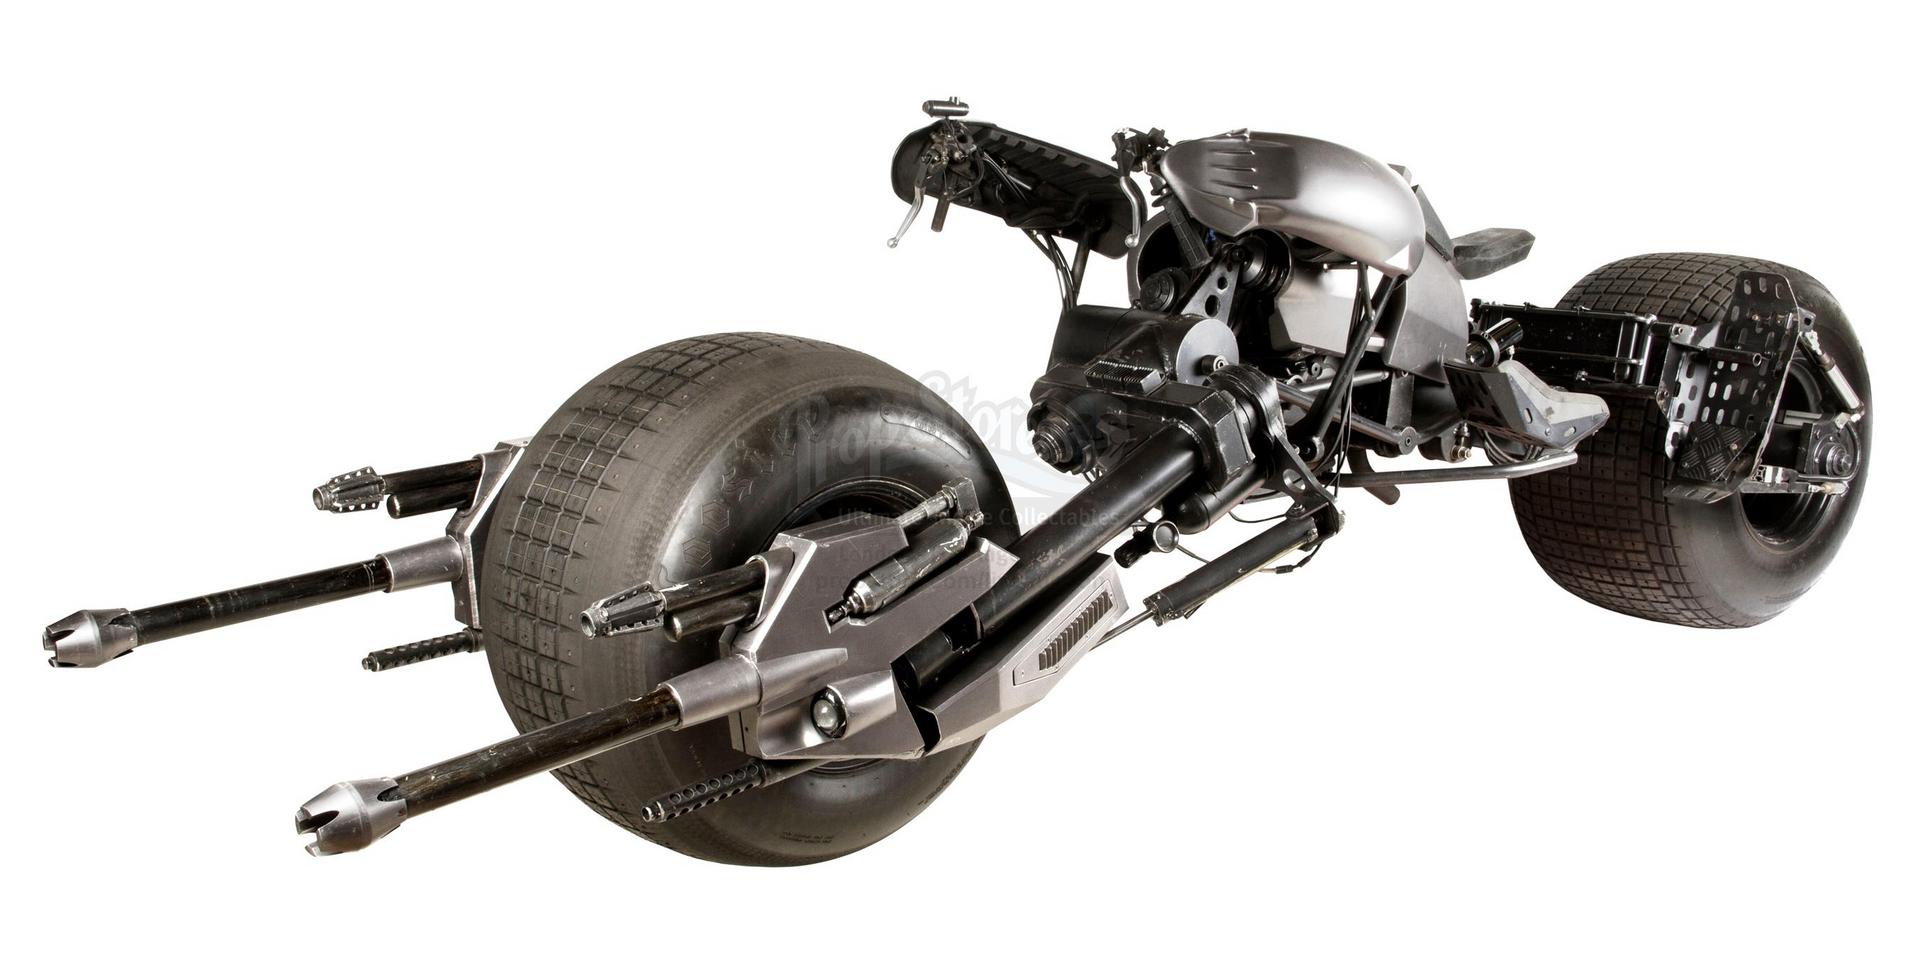 dark-knight-trilogys-batpod-motorcycle-is-up-for-auction_4